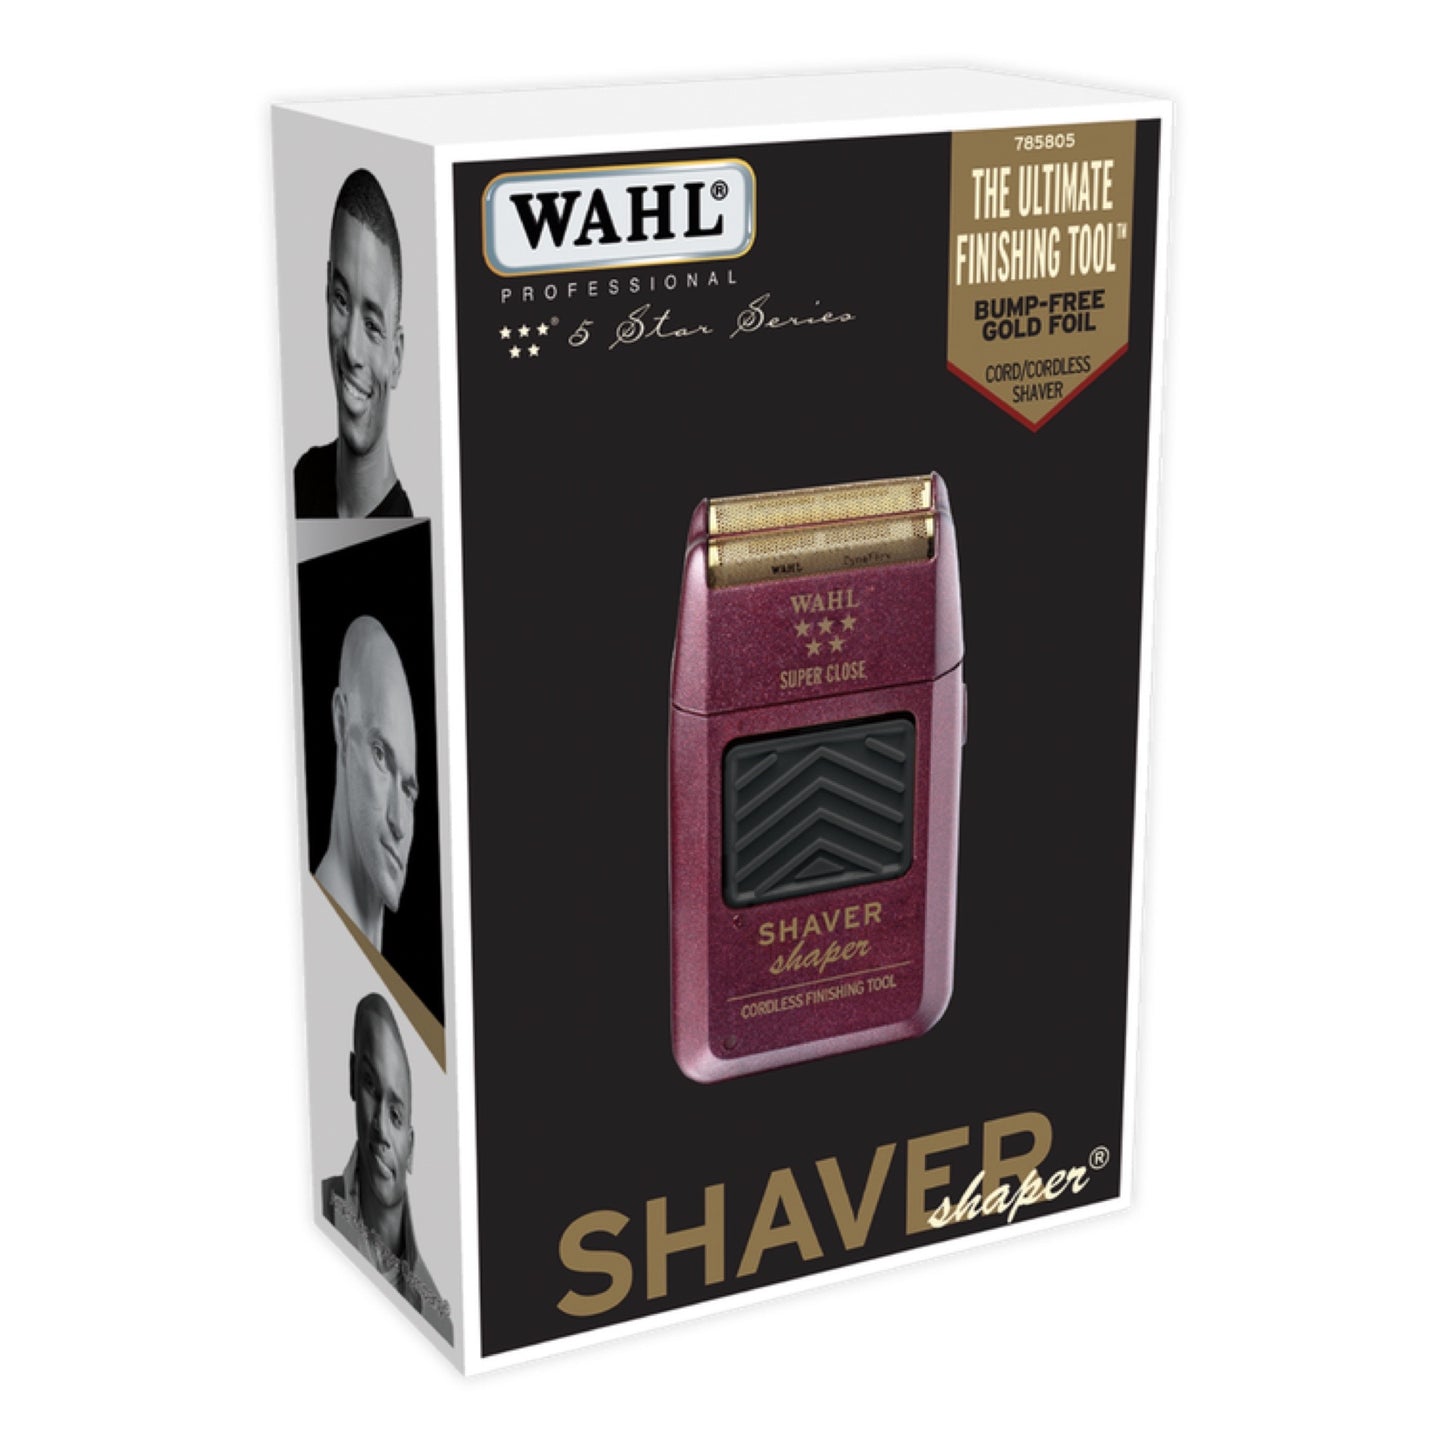 Wahl 5 Star Electric Shaver Box